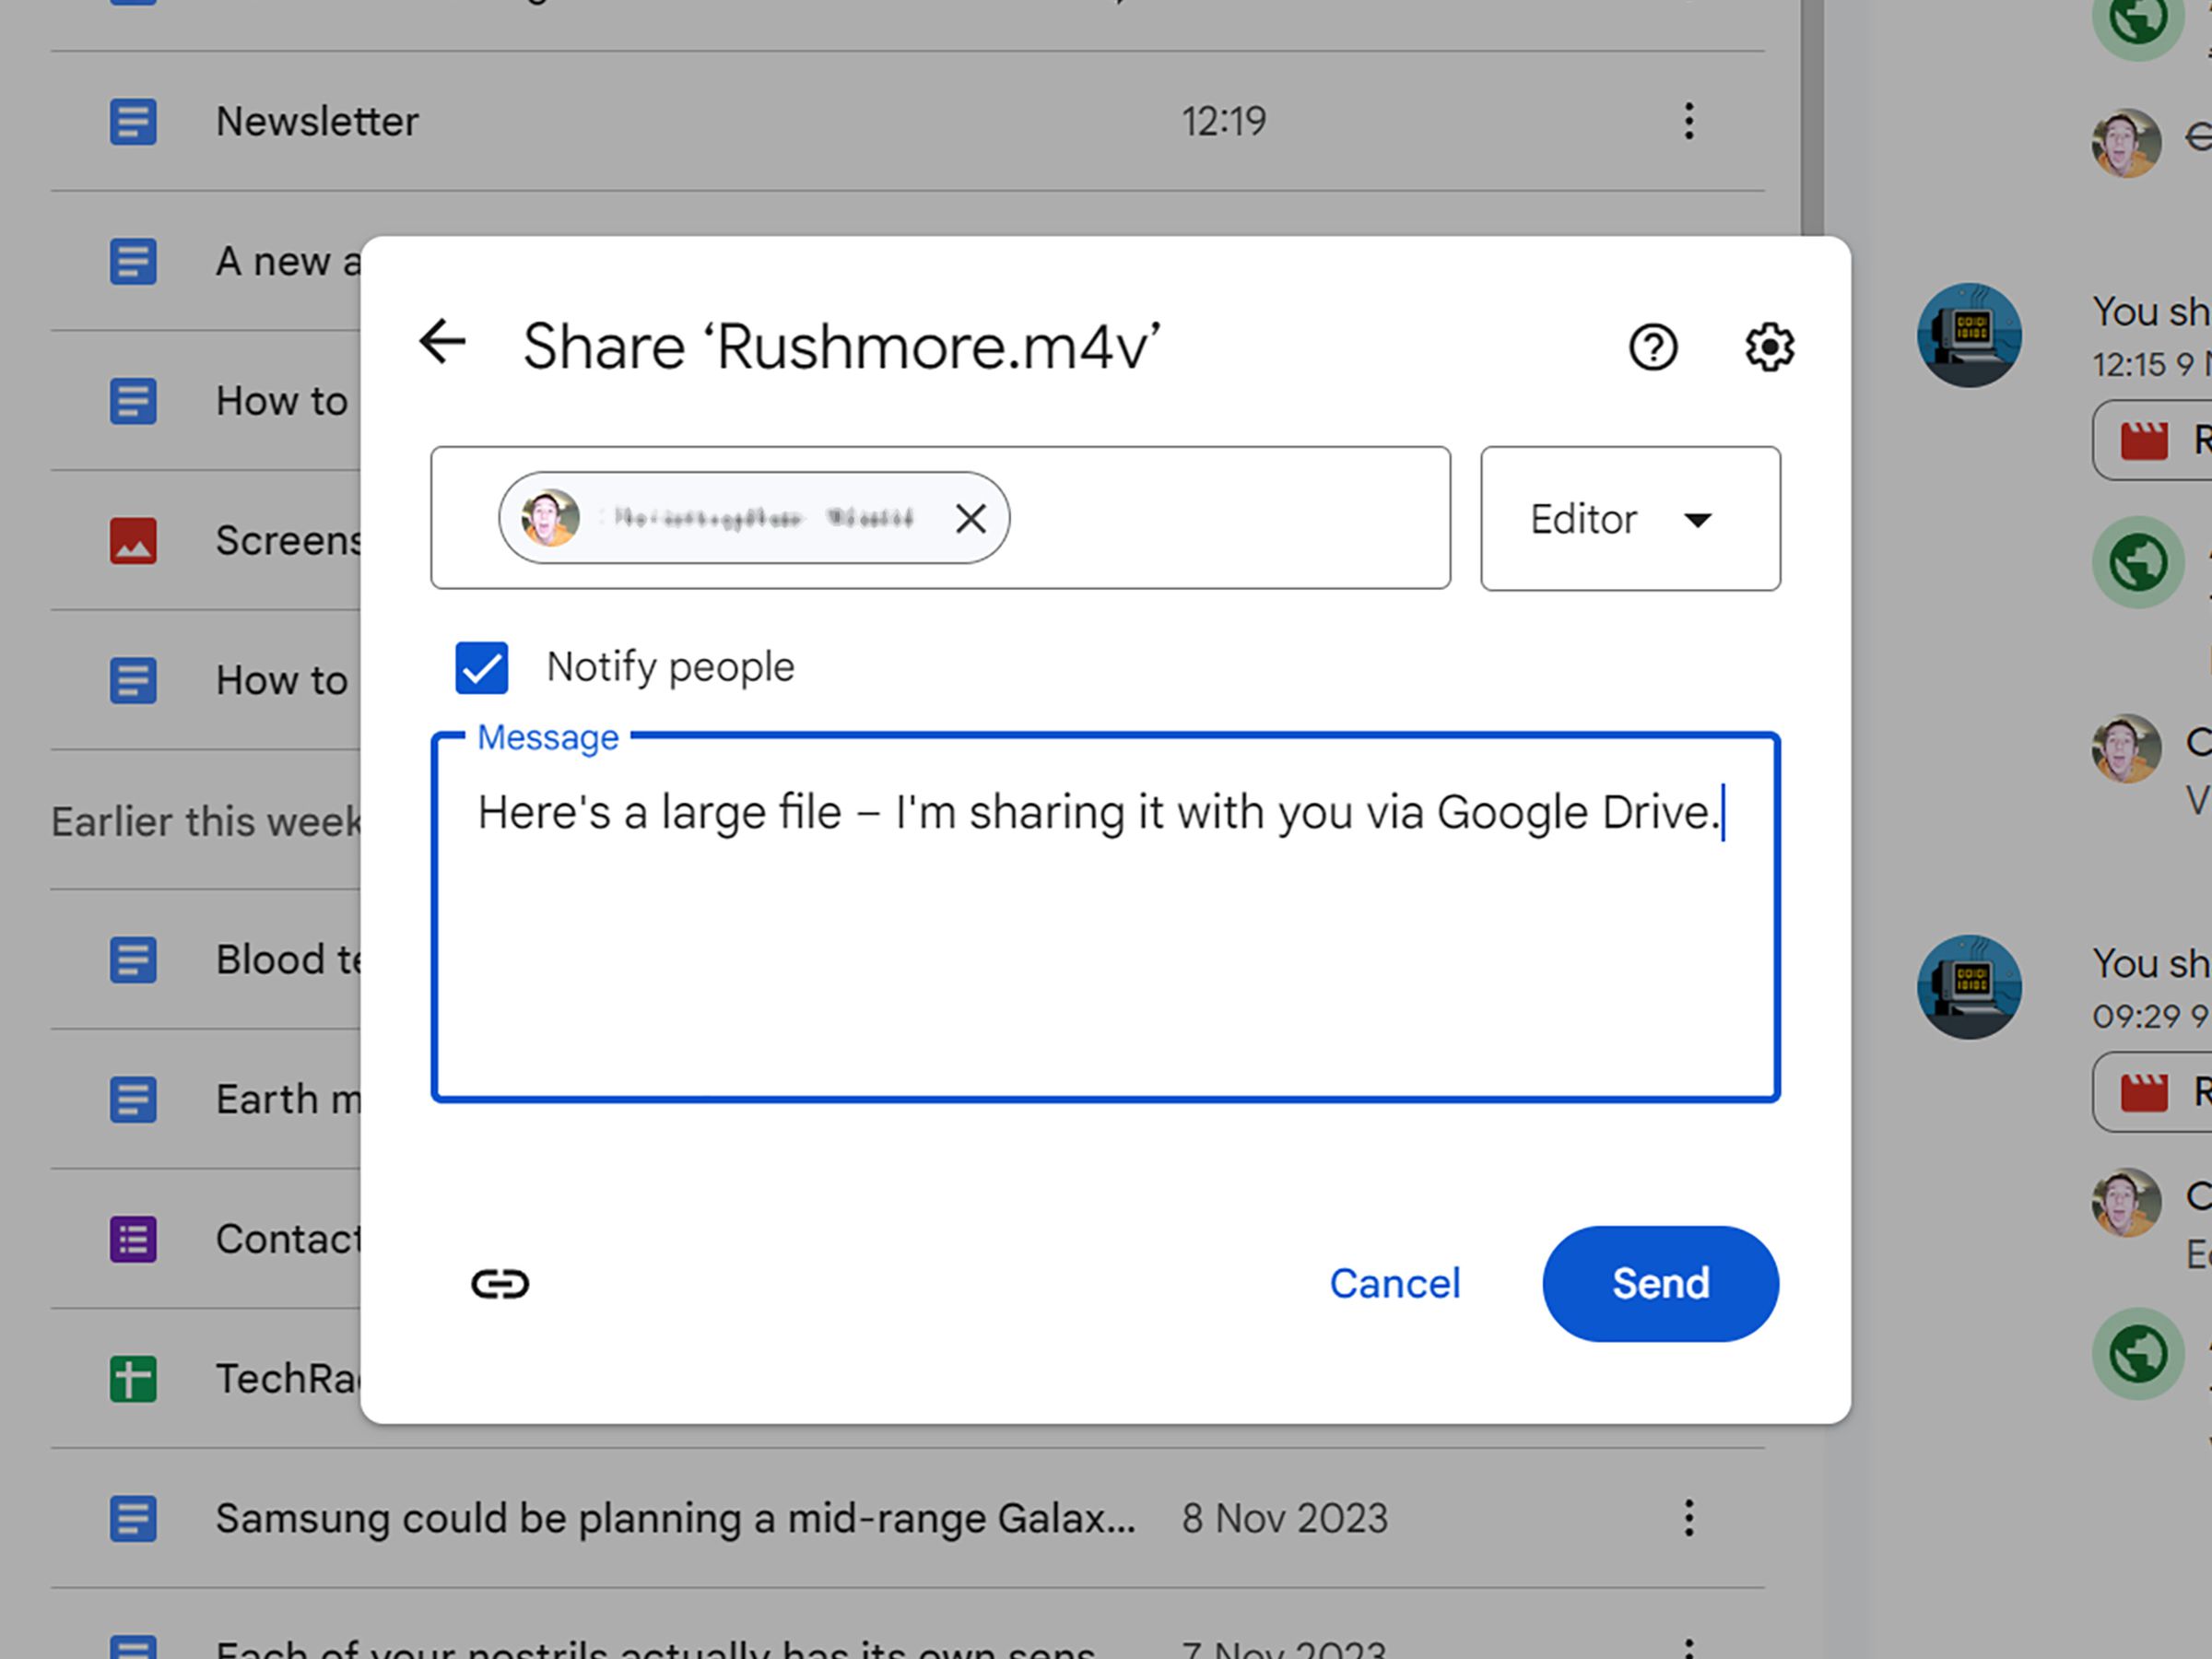 Pop-up box headed “Share ‘Rushmore.m4v’ with a contact below that and a message box below that, with Cancel and Send buttons on the bottom right.